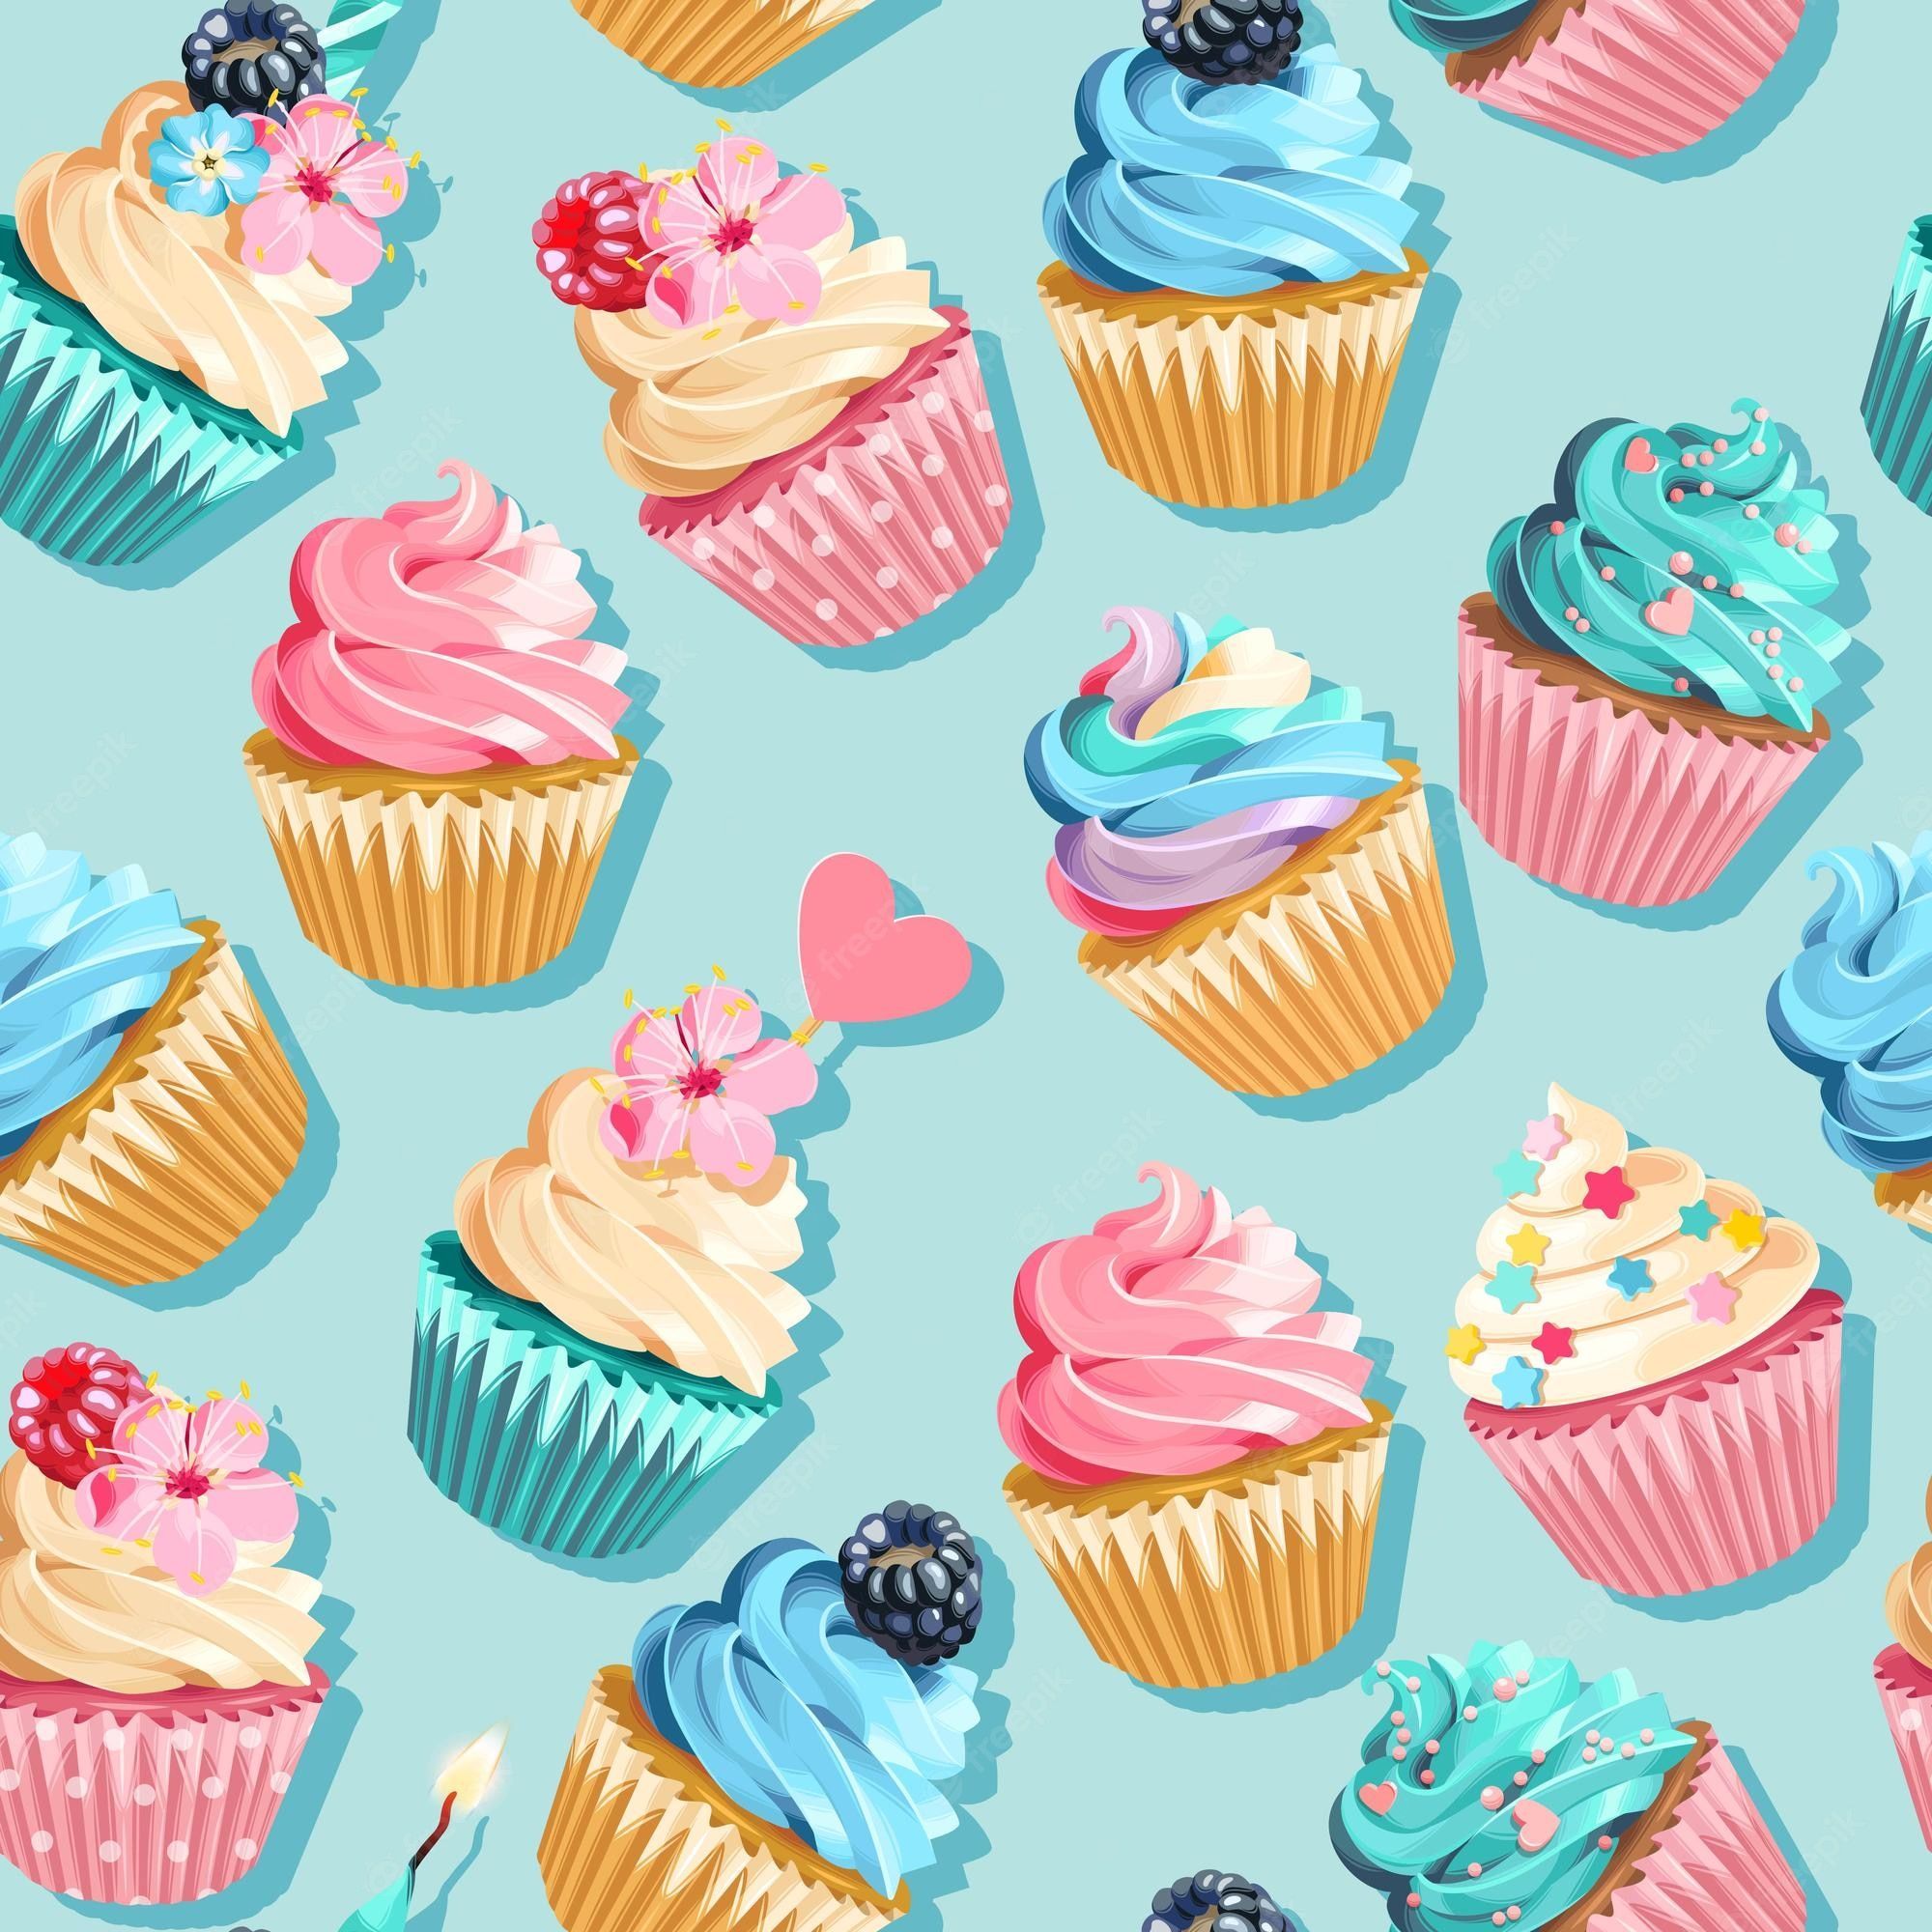 Premium Vector. Vector seamless pink and blue cupcake pattern